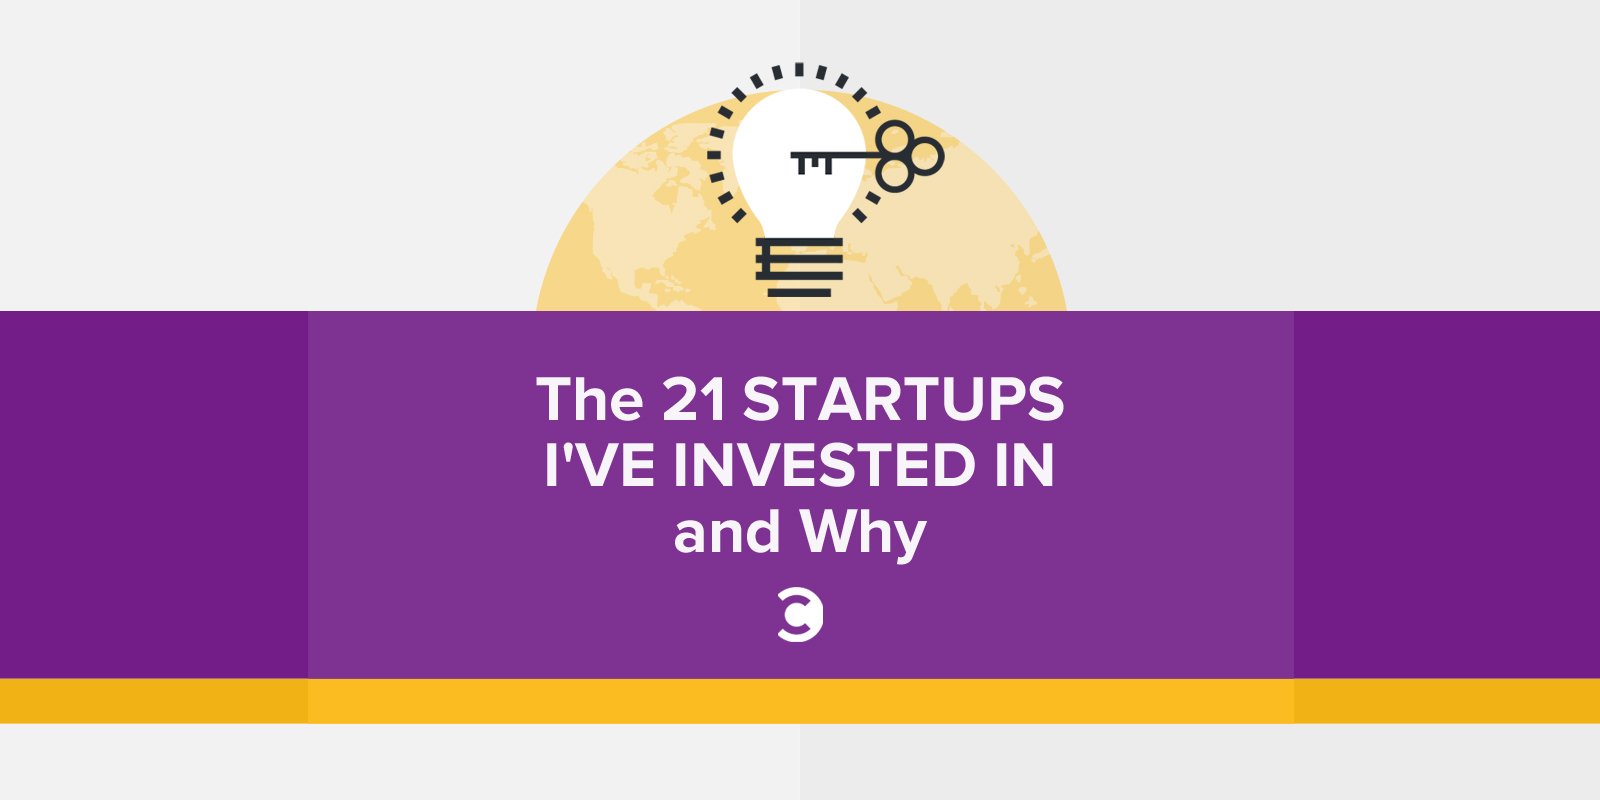 The 21 Startups I've Invested In and Why